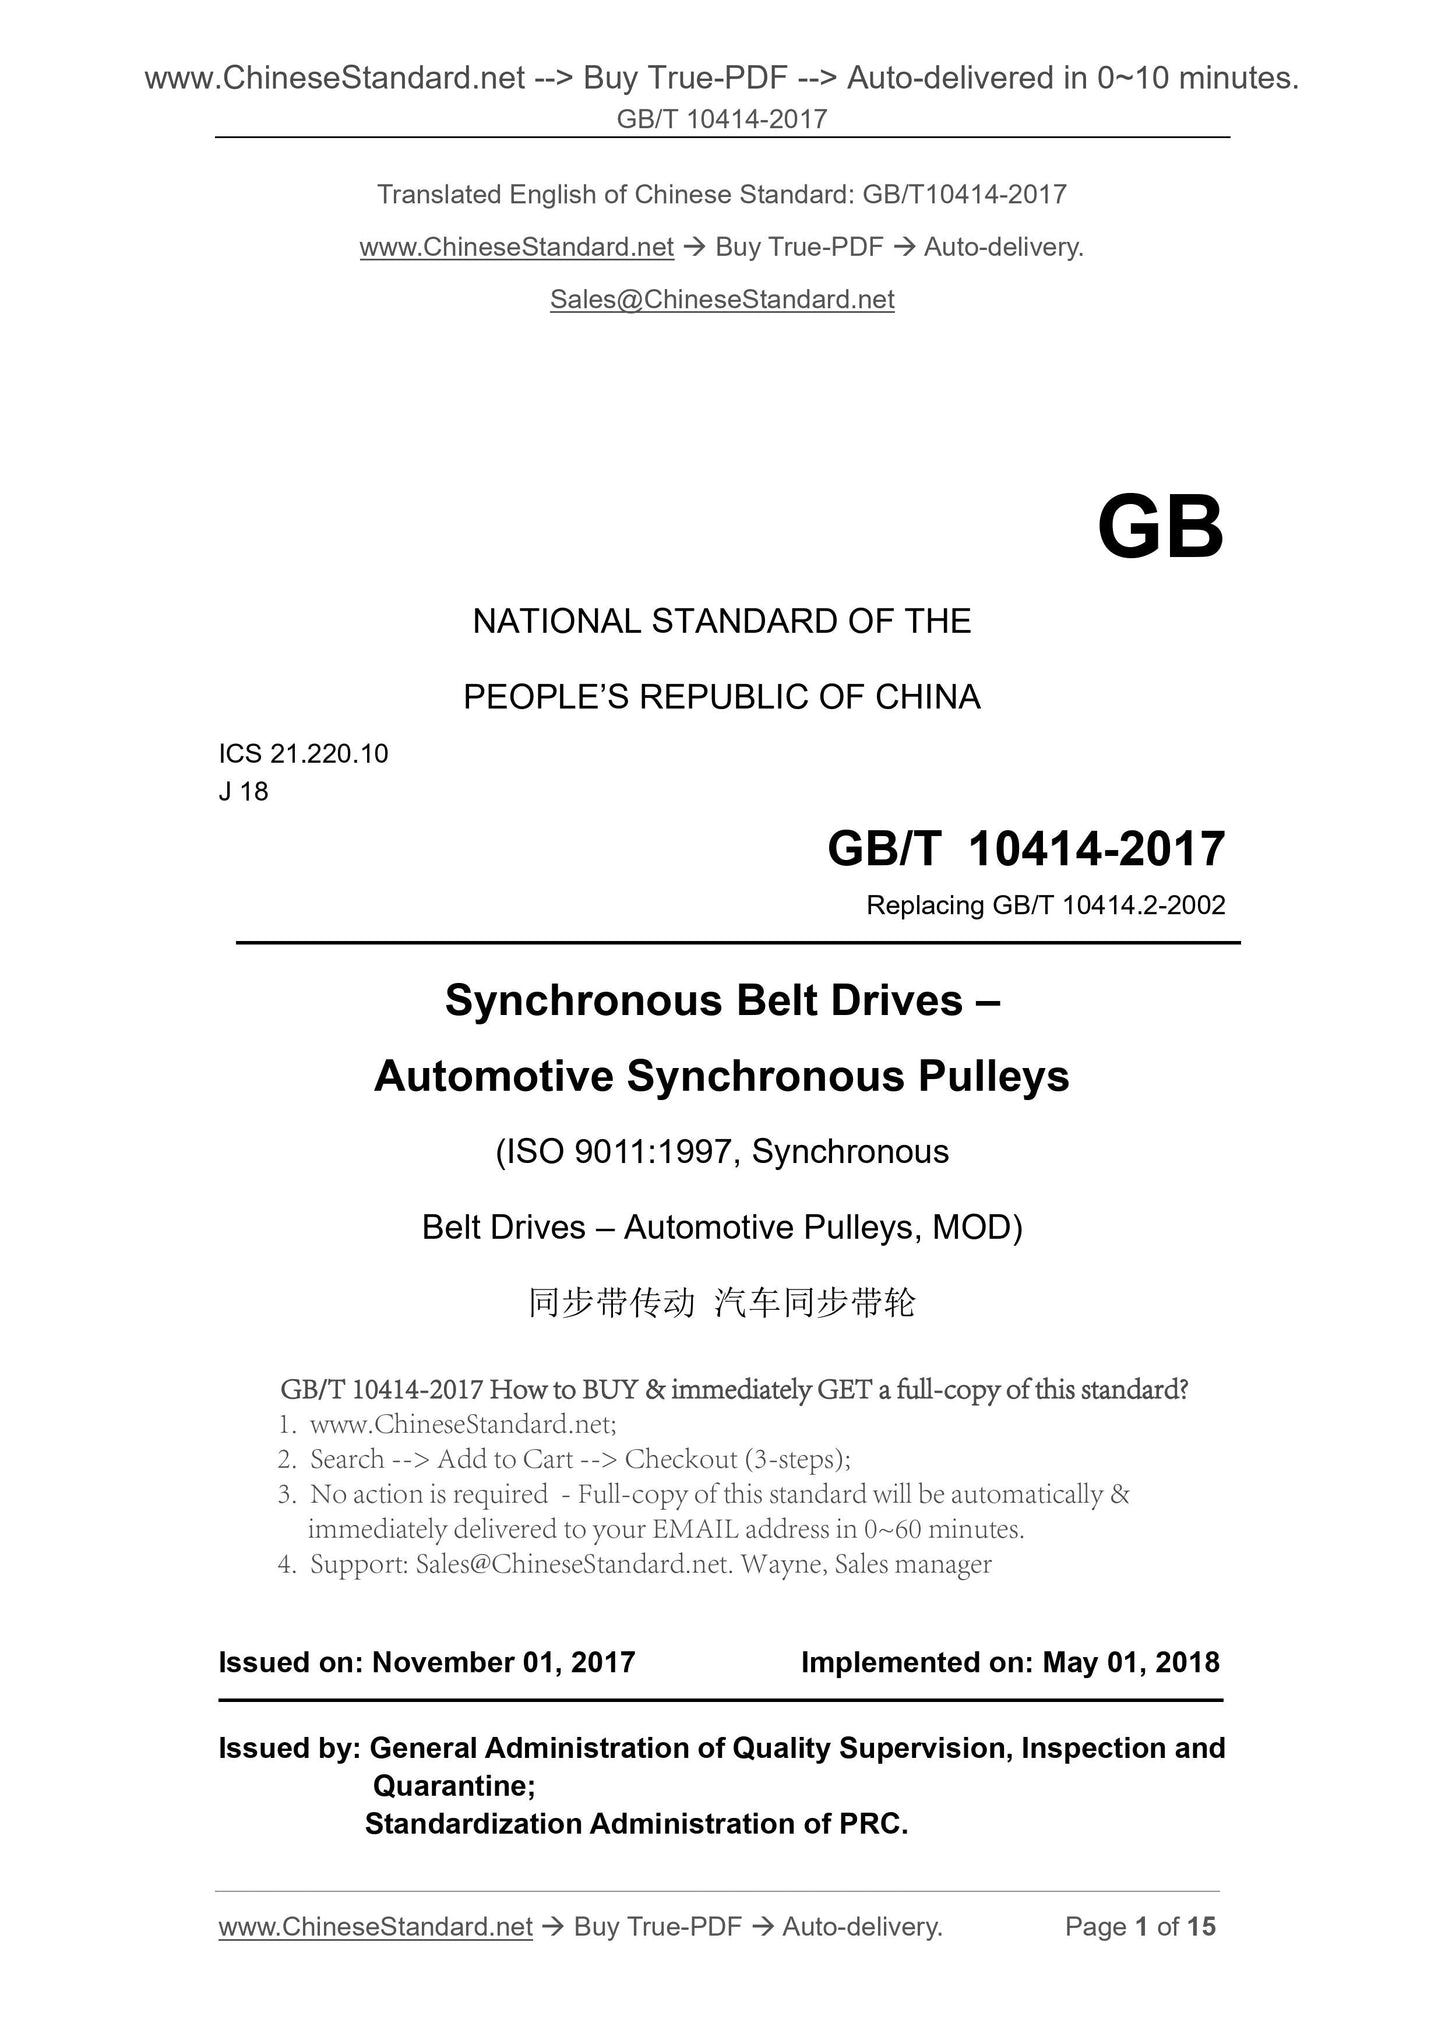 GB/T 10414-2017 Page 1